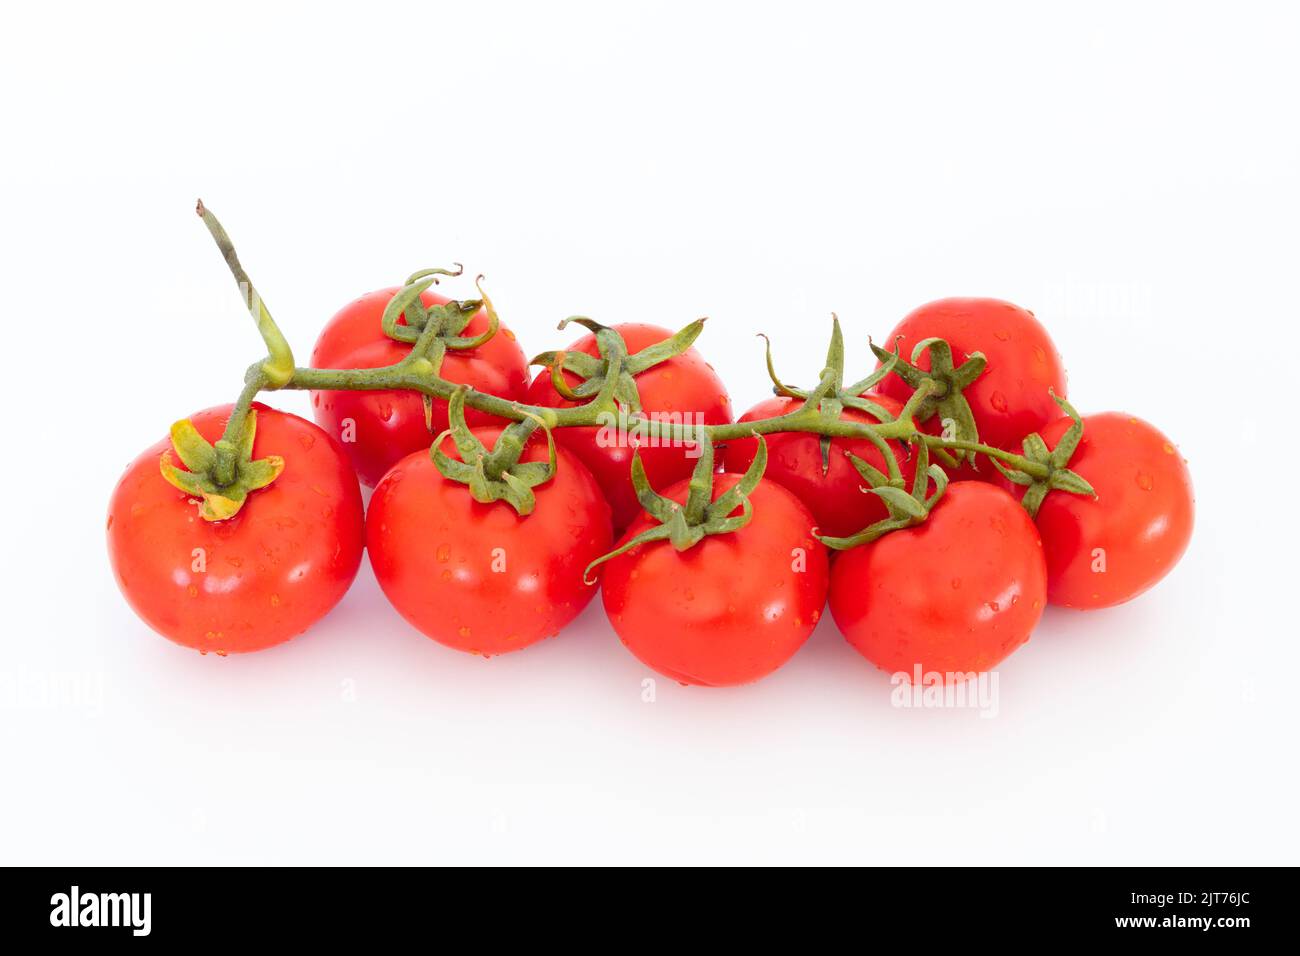 Fresh vegetable, red cherry tomato isolated on white background, food concept, copy space. Stock Photo